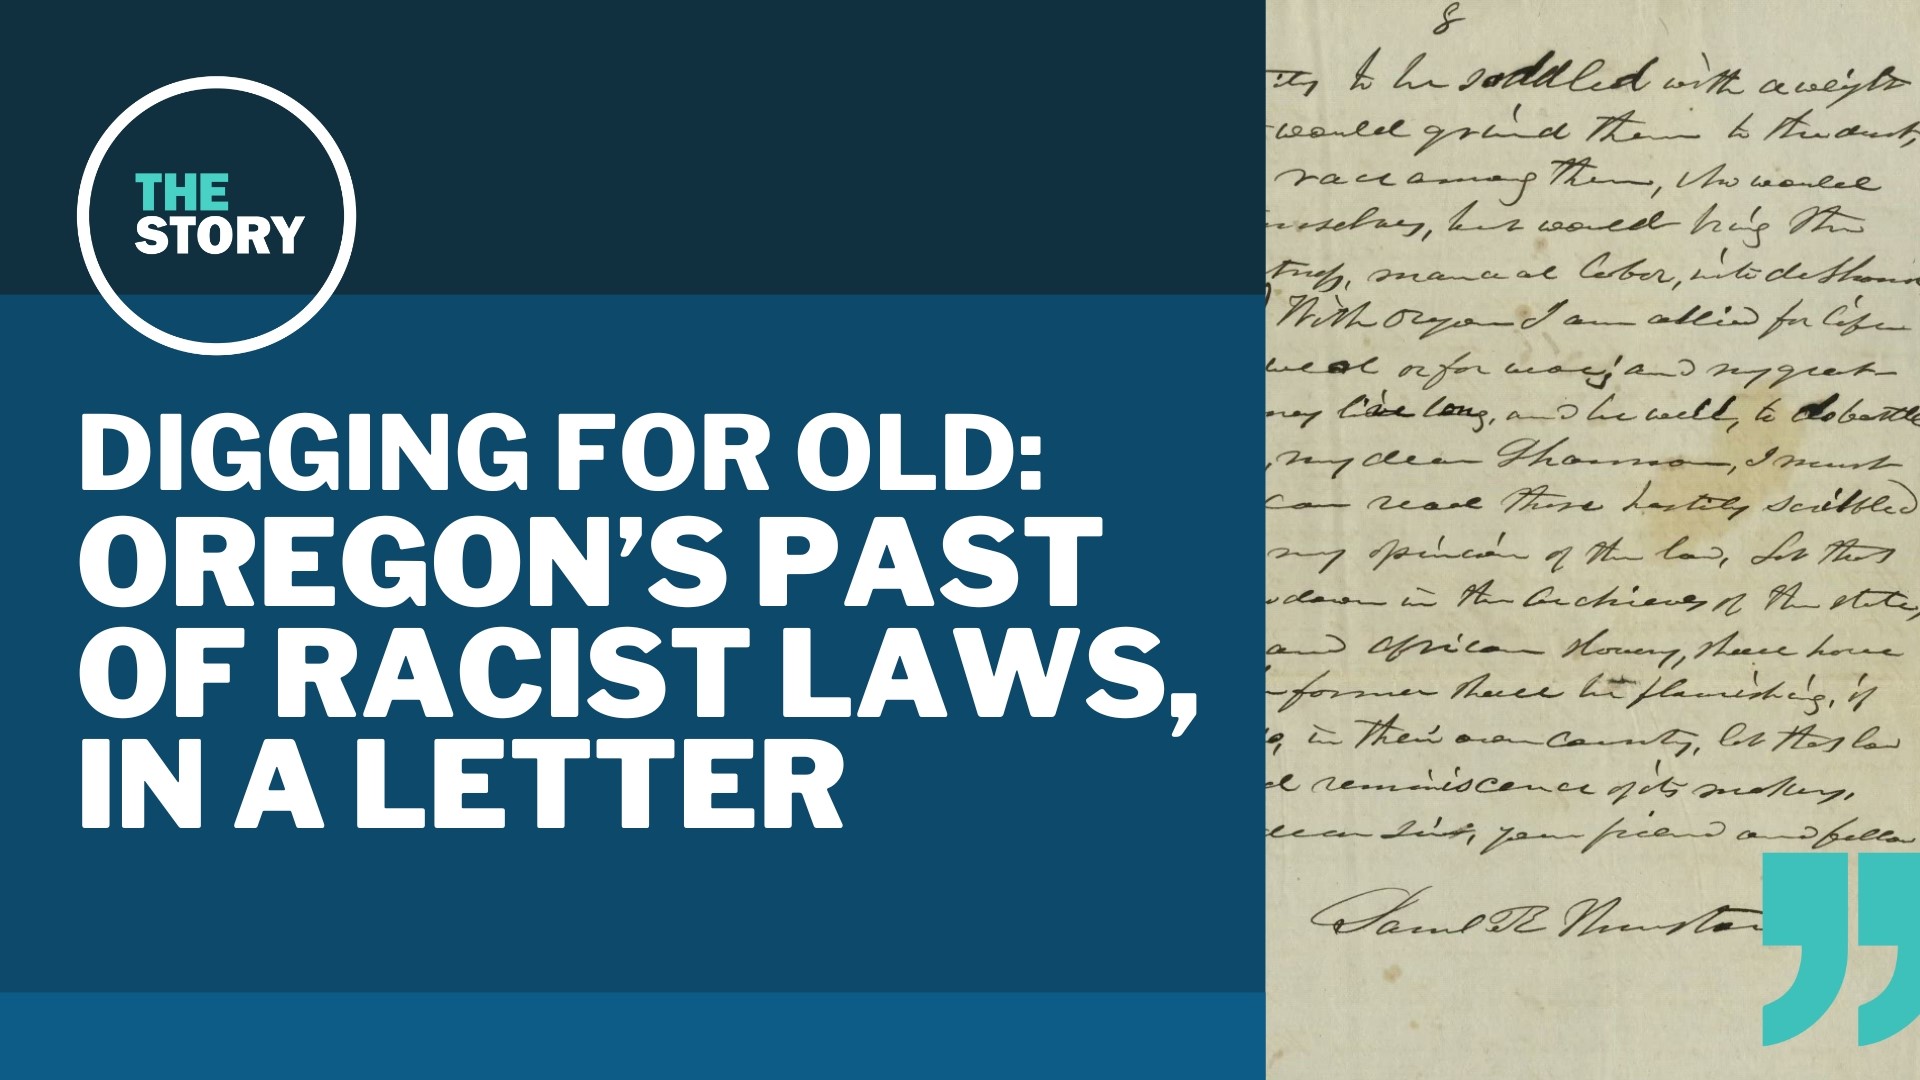 The letter, penned by a legislator for Oregon's territorial government, celebrates laws of the time that barred Black people from the state.